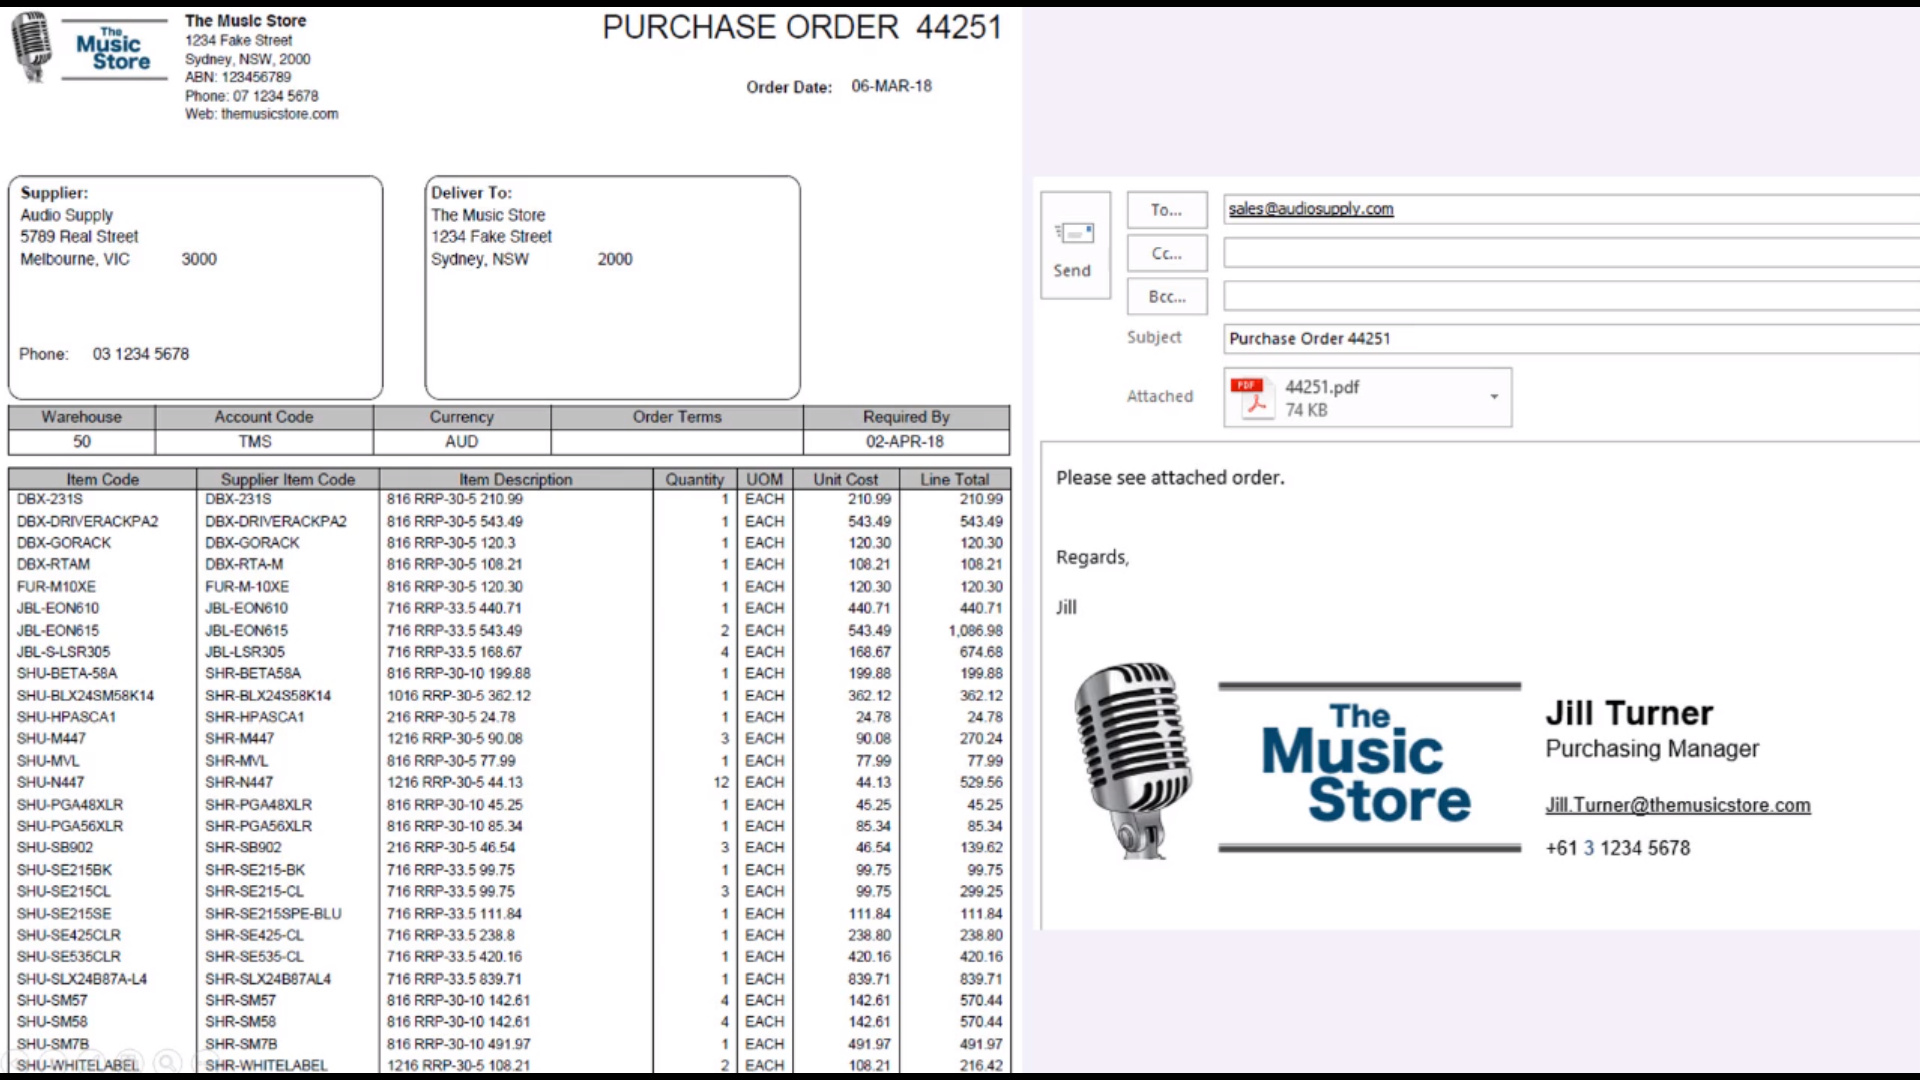 Lucy interface allows you to review the original purchase order document and email